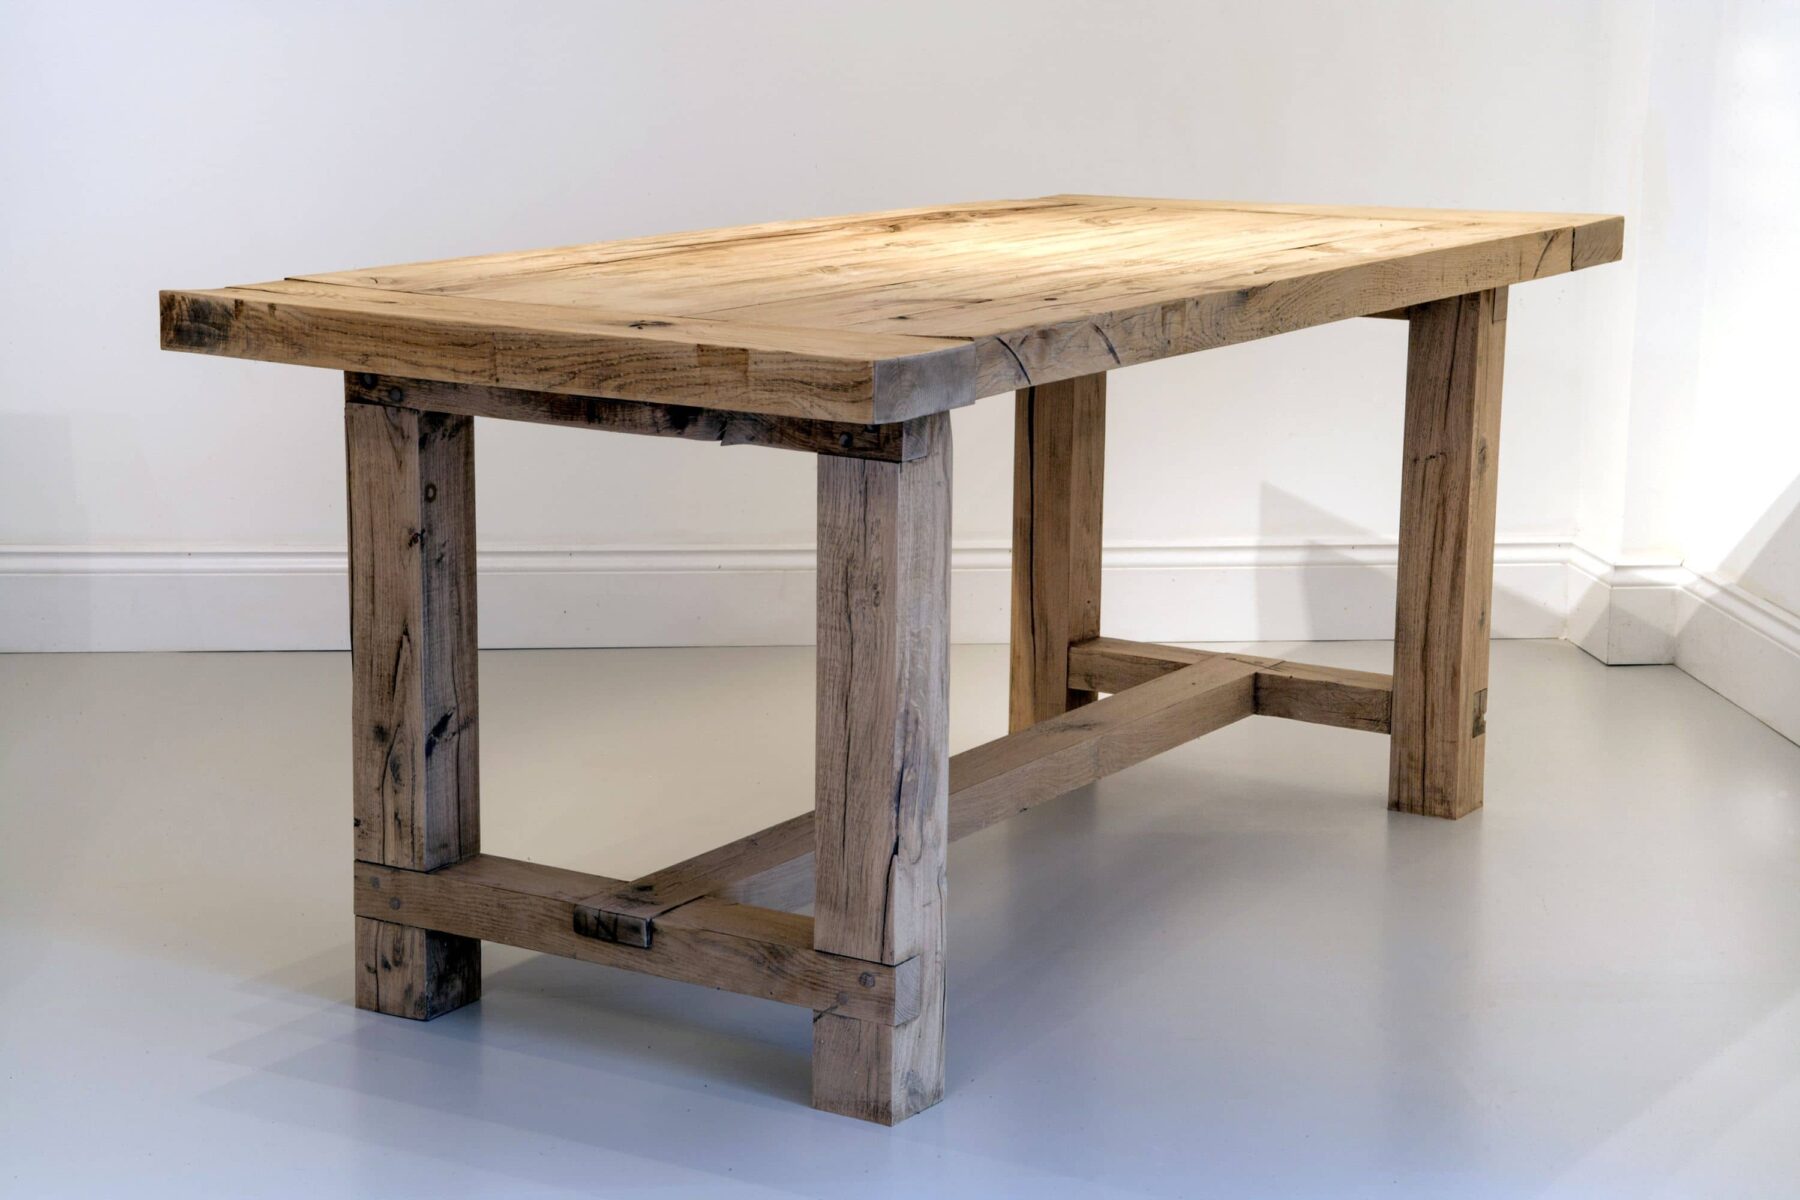 Rustic wooden dining table